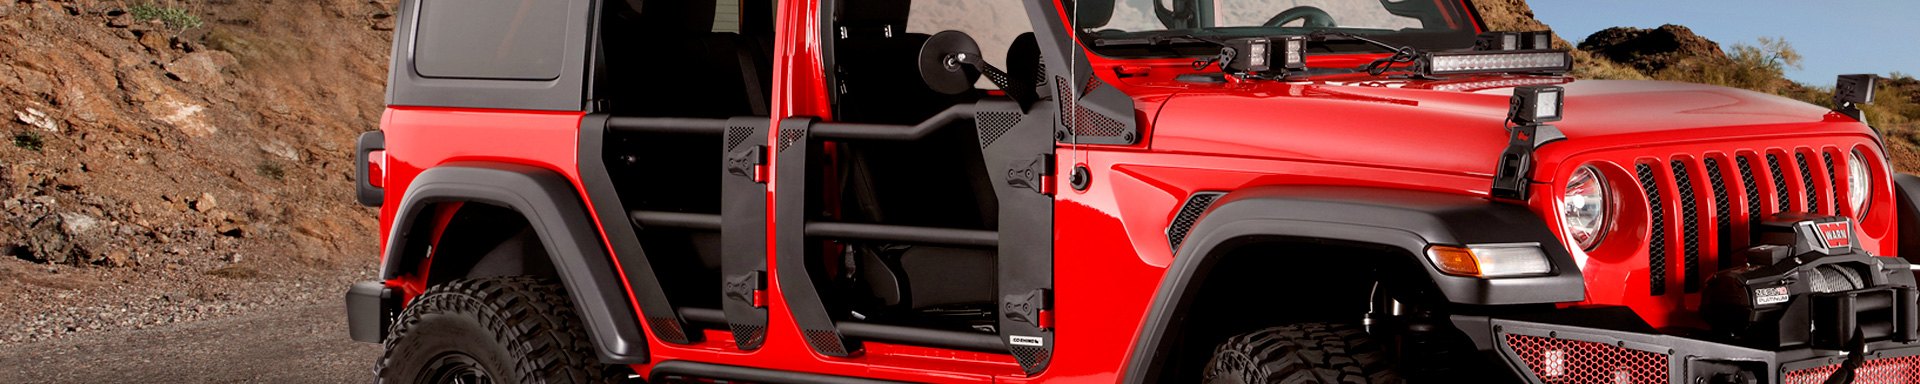 Trailline Tube Doors Are Now Available For Jeep Wrangler And Gladiator